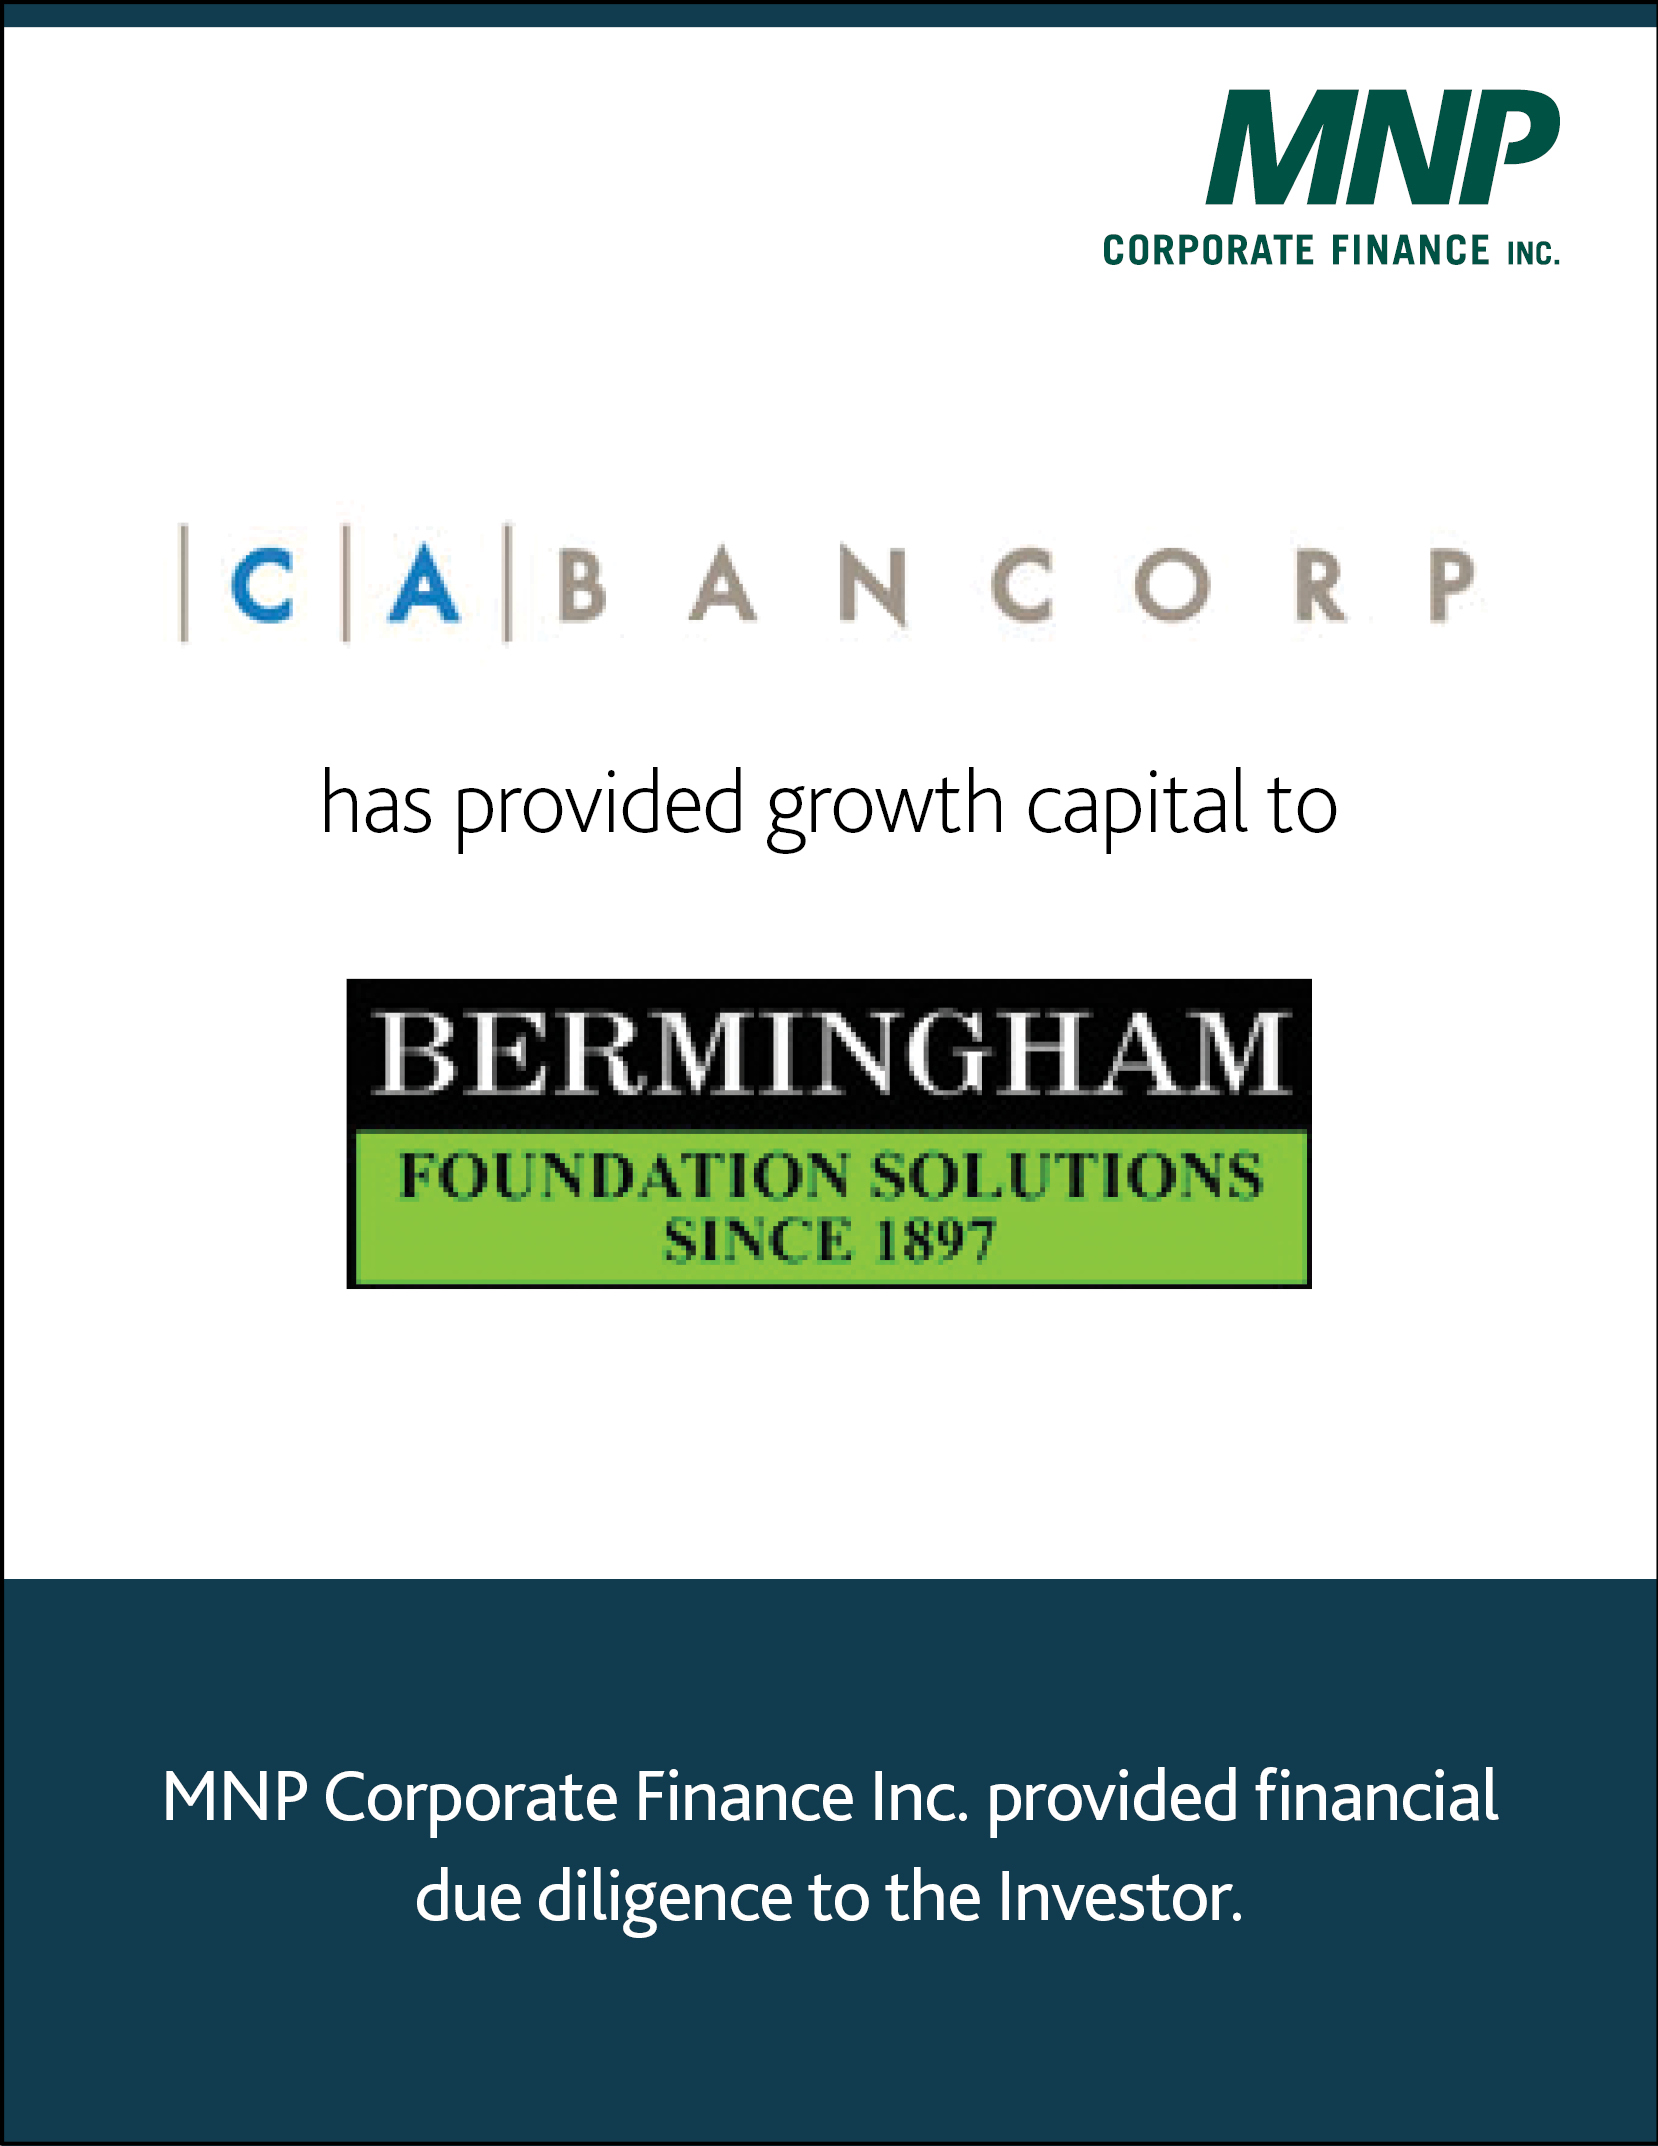 CA Bancorp has provided growth capital to Bermingham Foundation Solutions Since 1897. 